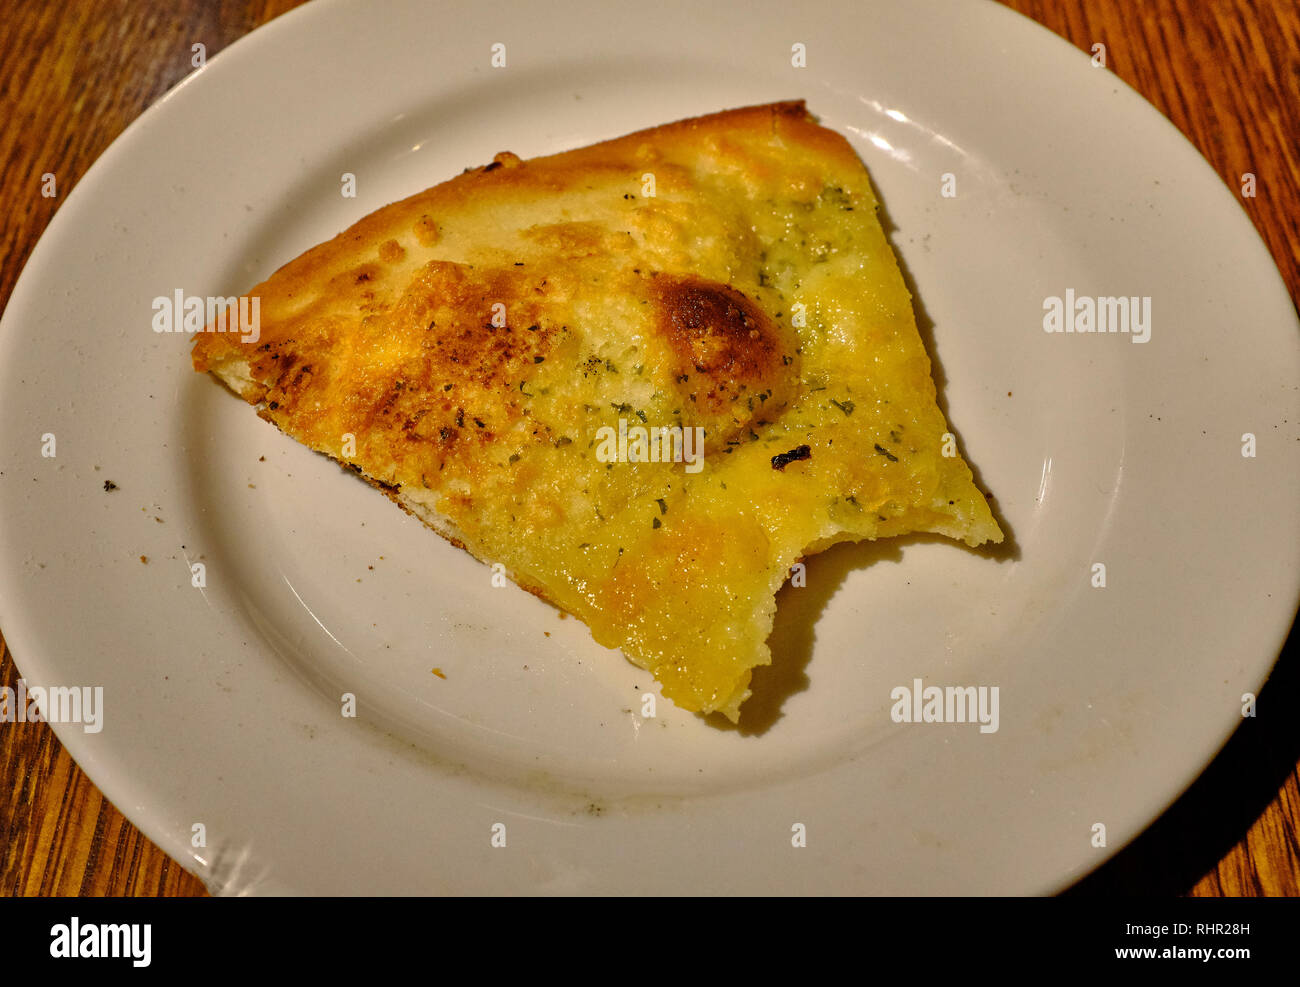 A single slice of stone baked flatbread with garlic butter that has partially been eaten on a white plate placed on a table Stock Photo